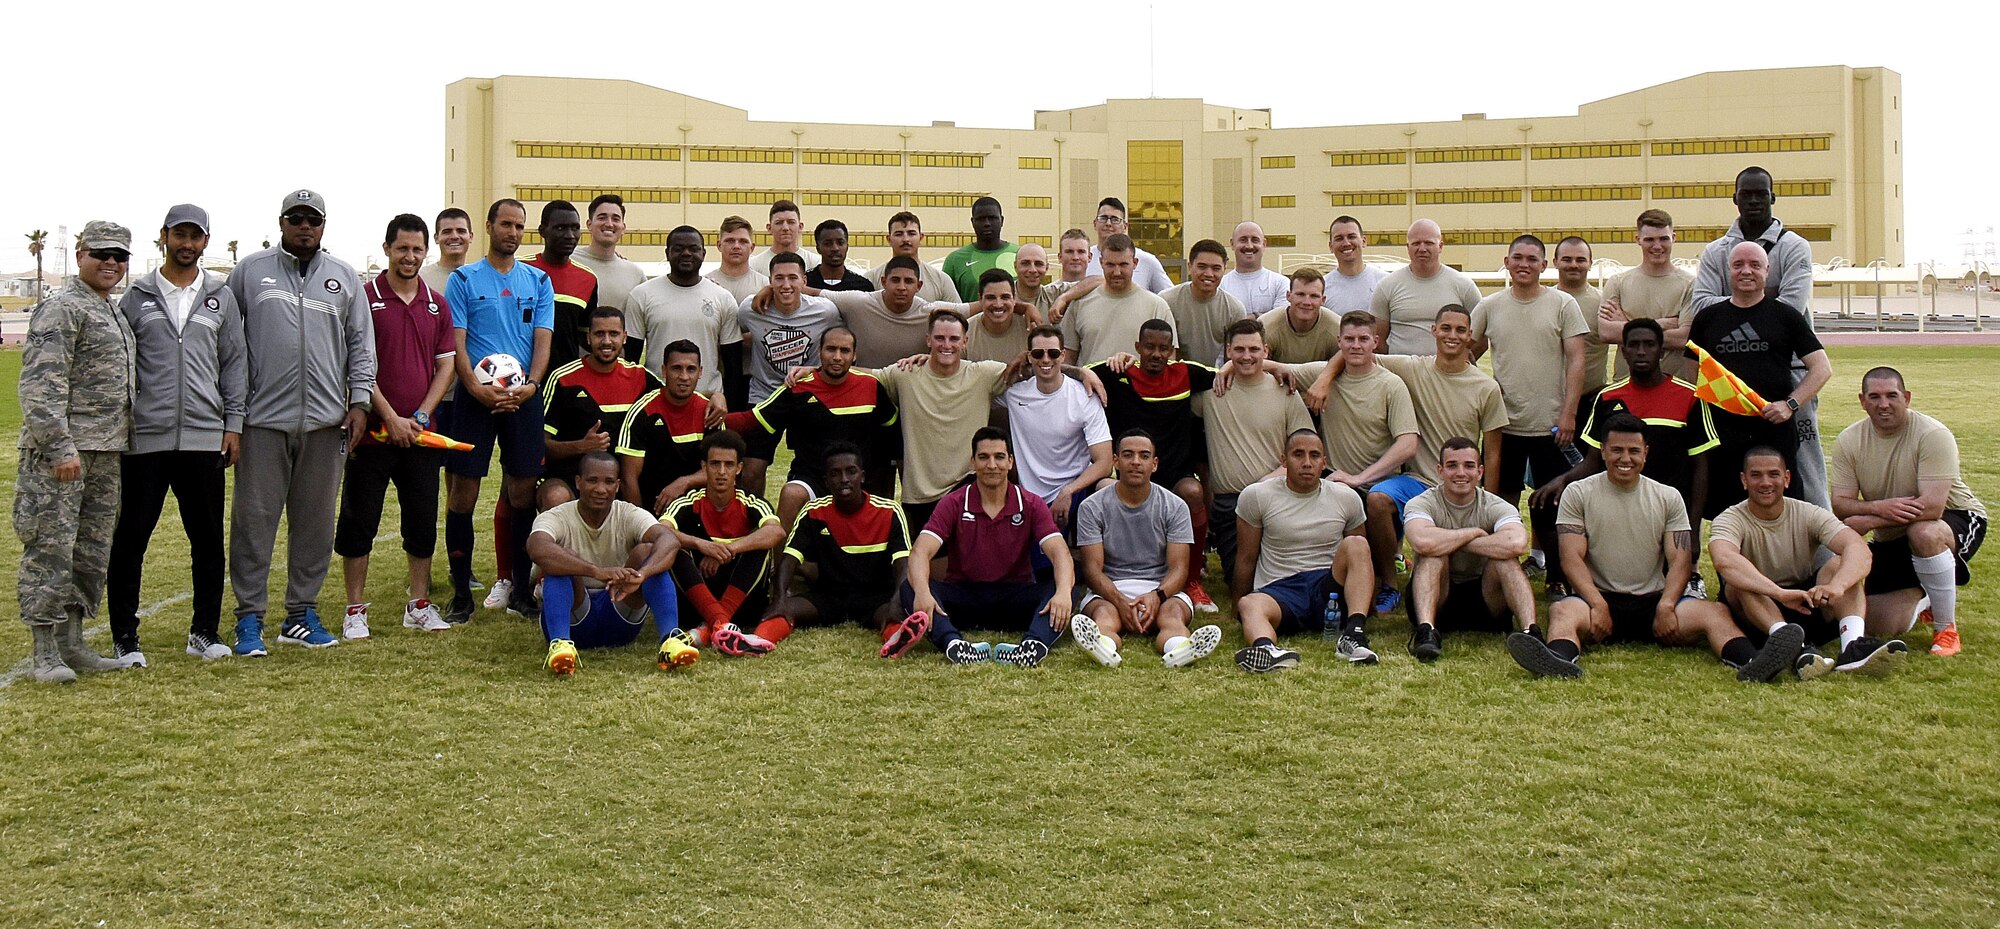 U.S. Air Force Airmen with the 379th Expeditionary Security Forces Squadron and Qatar Emiri Air Force Security Forces members pose for a photo after a friendly soccer match at Al Udeid Air Base, Qatar, March 23, 2017. The Airmen who participated in the game and those who went to support their team had the chance to interact with their host nation counterparts during the friendly match. (U.S. Air Force photo by Senior Airman Cynthia A. Innocenti)